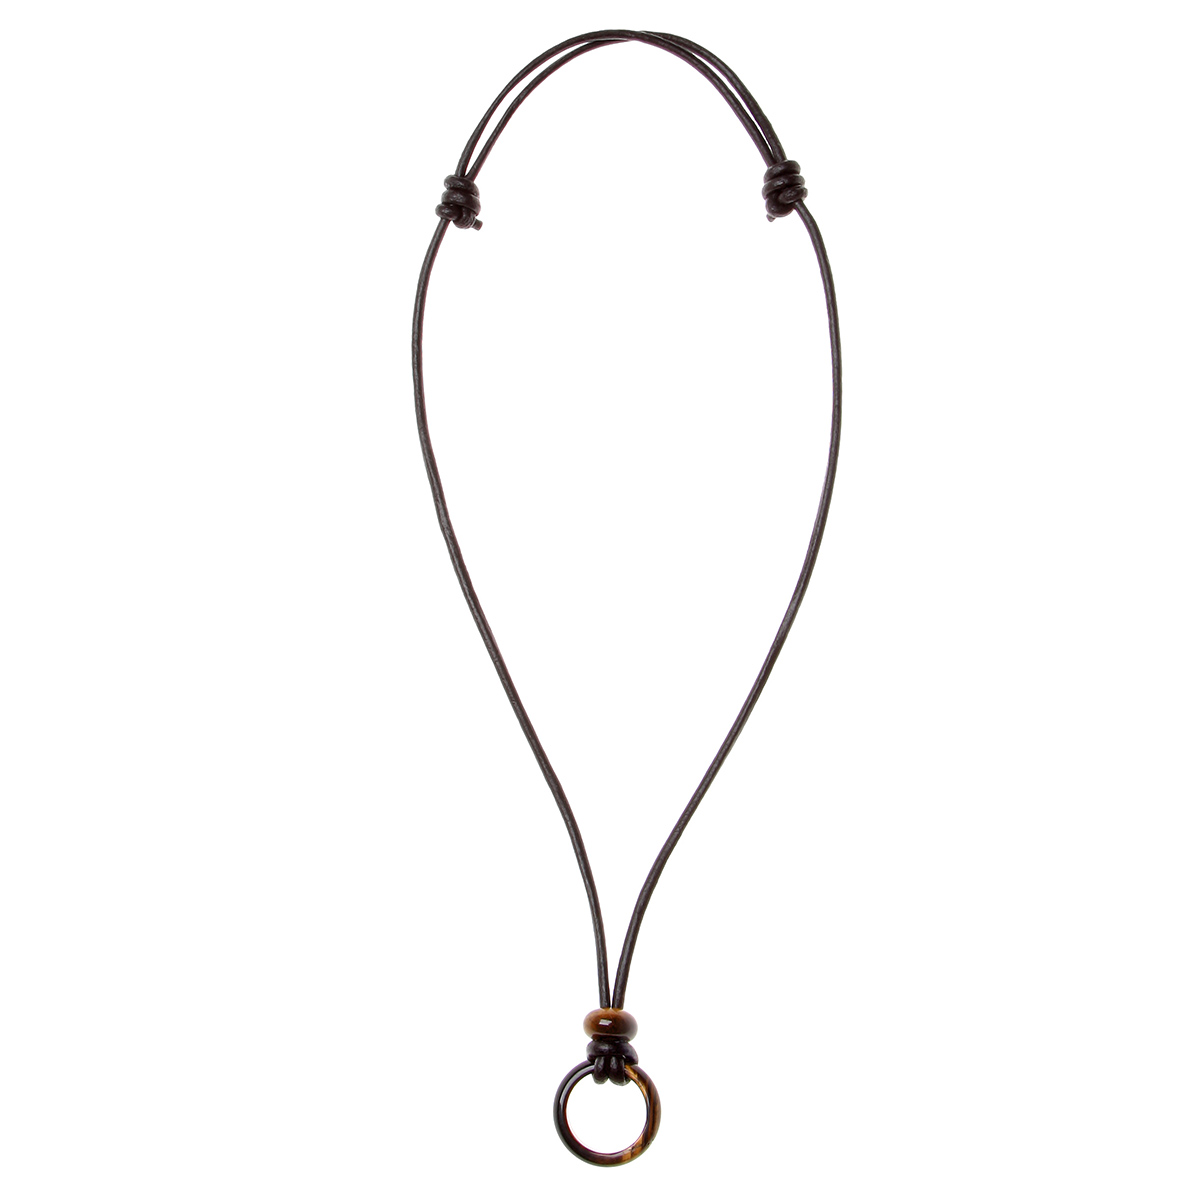 Necklace – Hanging for sunglasses - Amazon